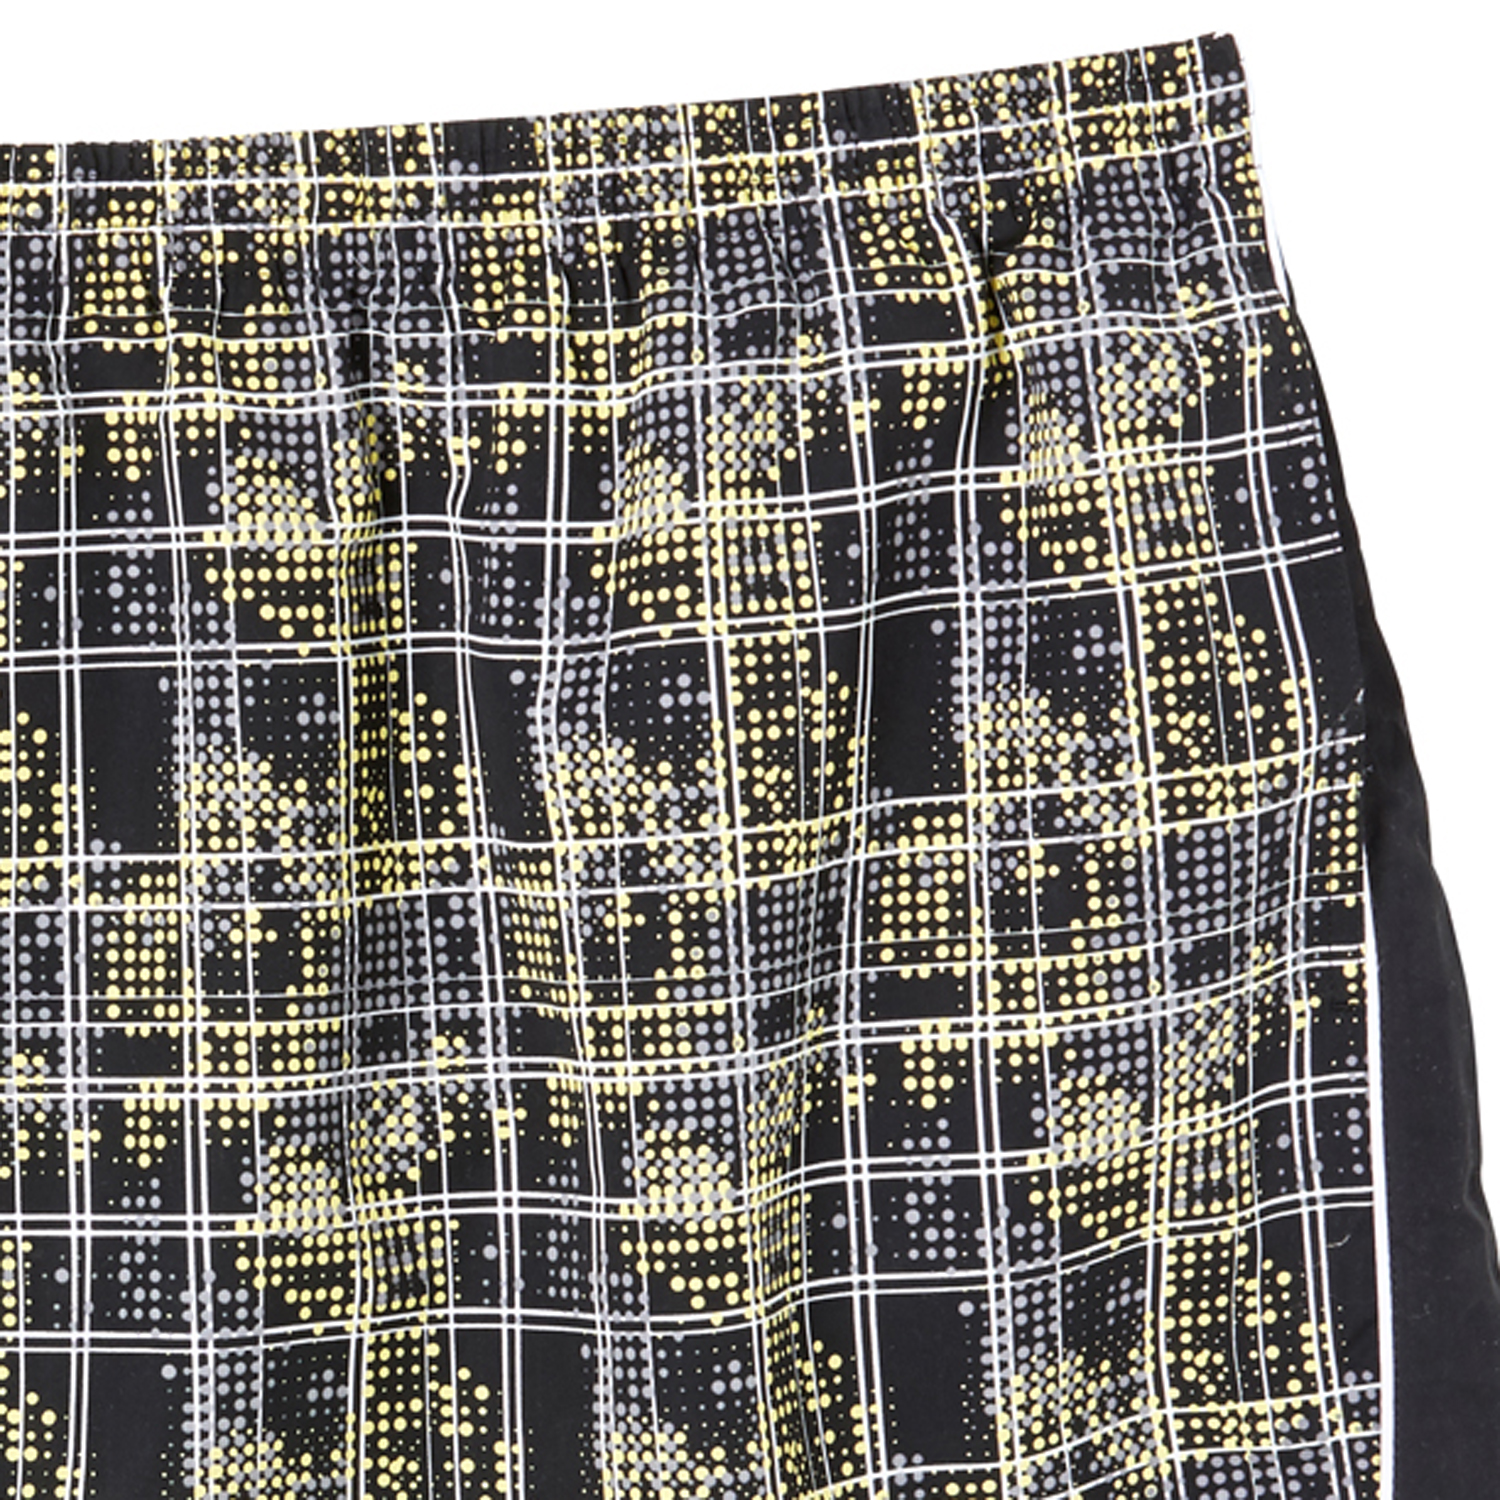 Swim shorts in black-yellow-grey-white patterned by eleMar up to oversize 10XL